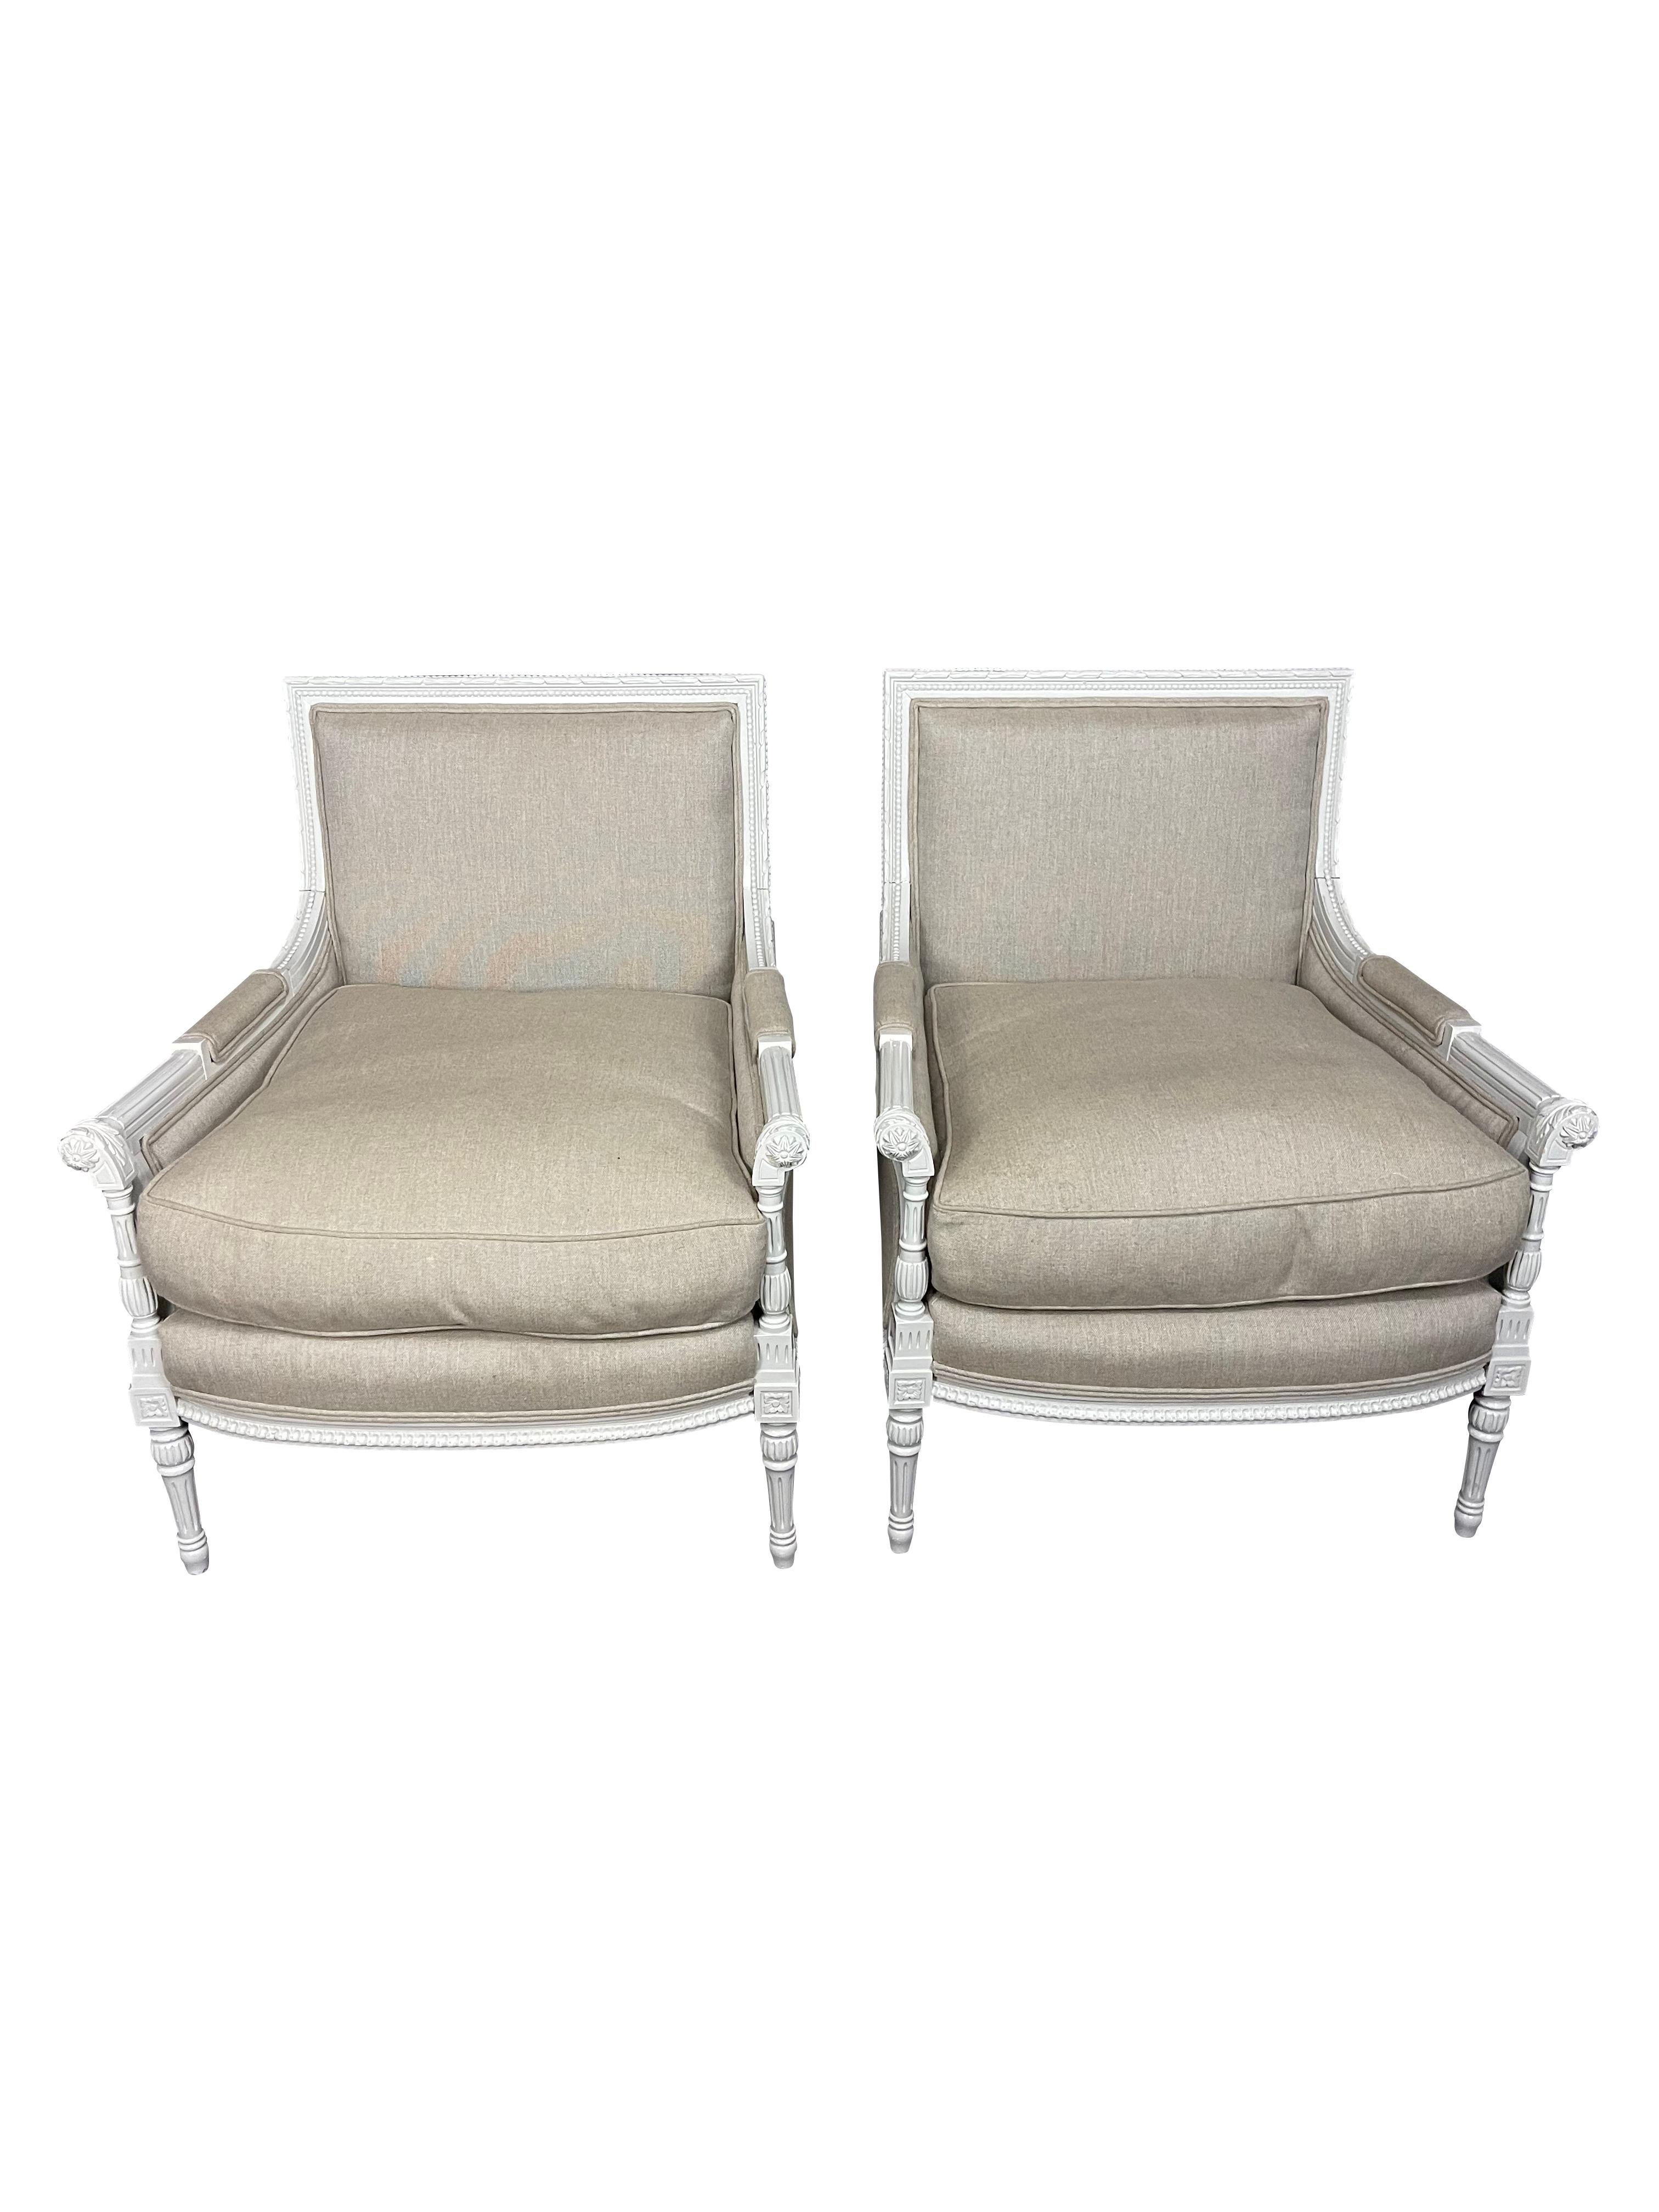 North American Pair of Gray Painted Louis XVI Directoire Style Bergeres, 20th Century